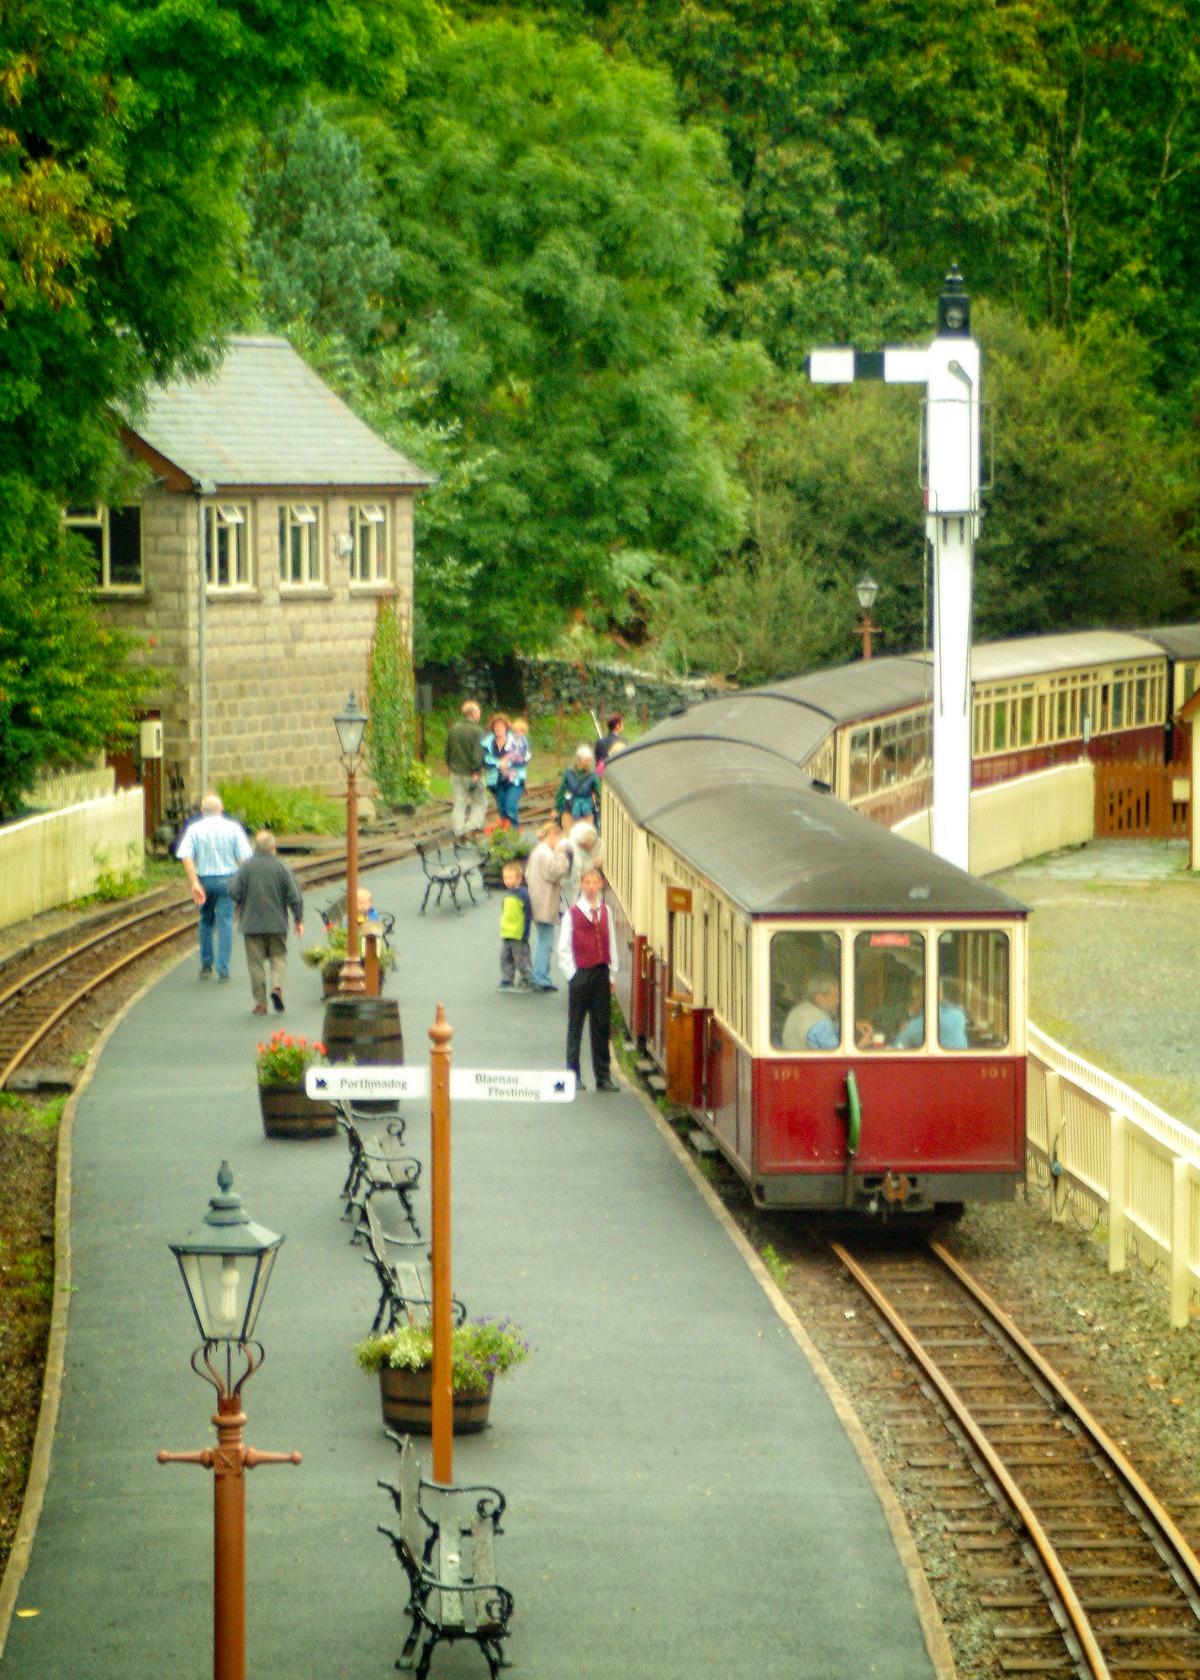 Wales has an extensive network of narrow-gauge train lines. Once used for transporting coal and slate, they now transport tourists and enable visitors to take in off-the-beaten-path vistas of Welsh scenery. (Copyright Fred J. Eckert)